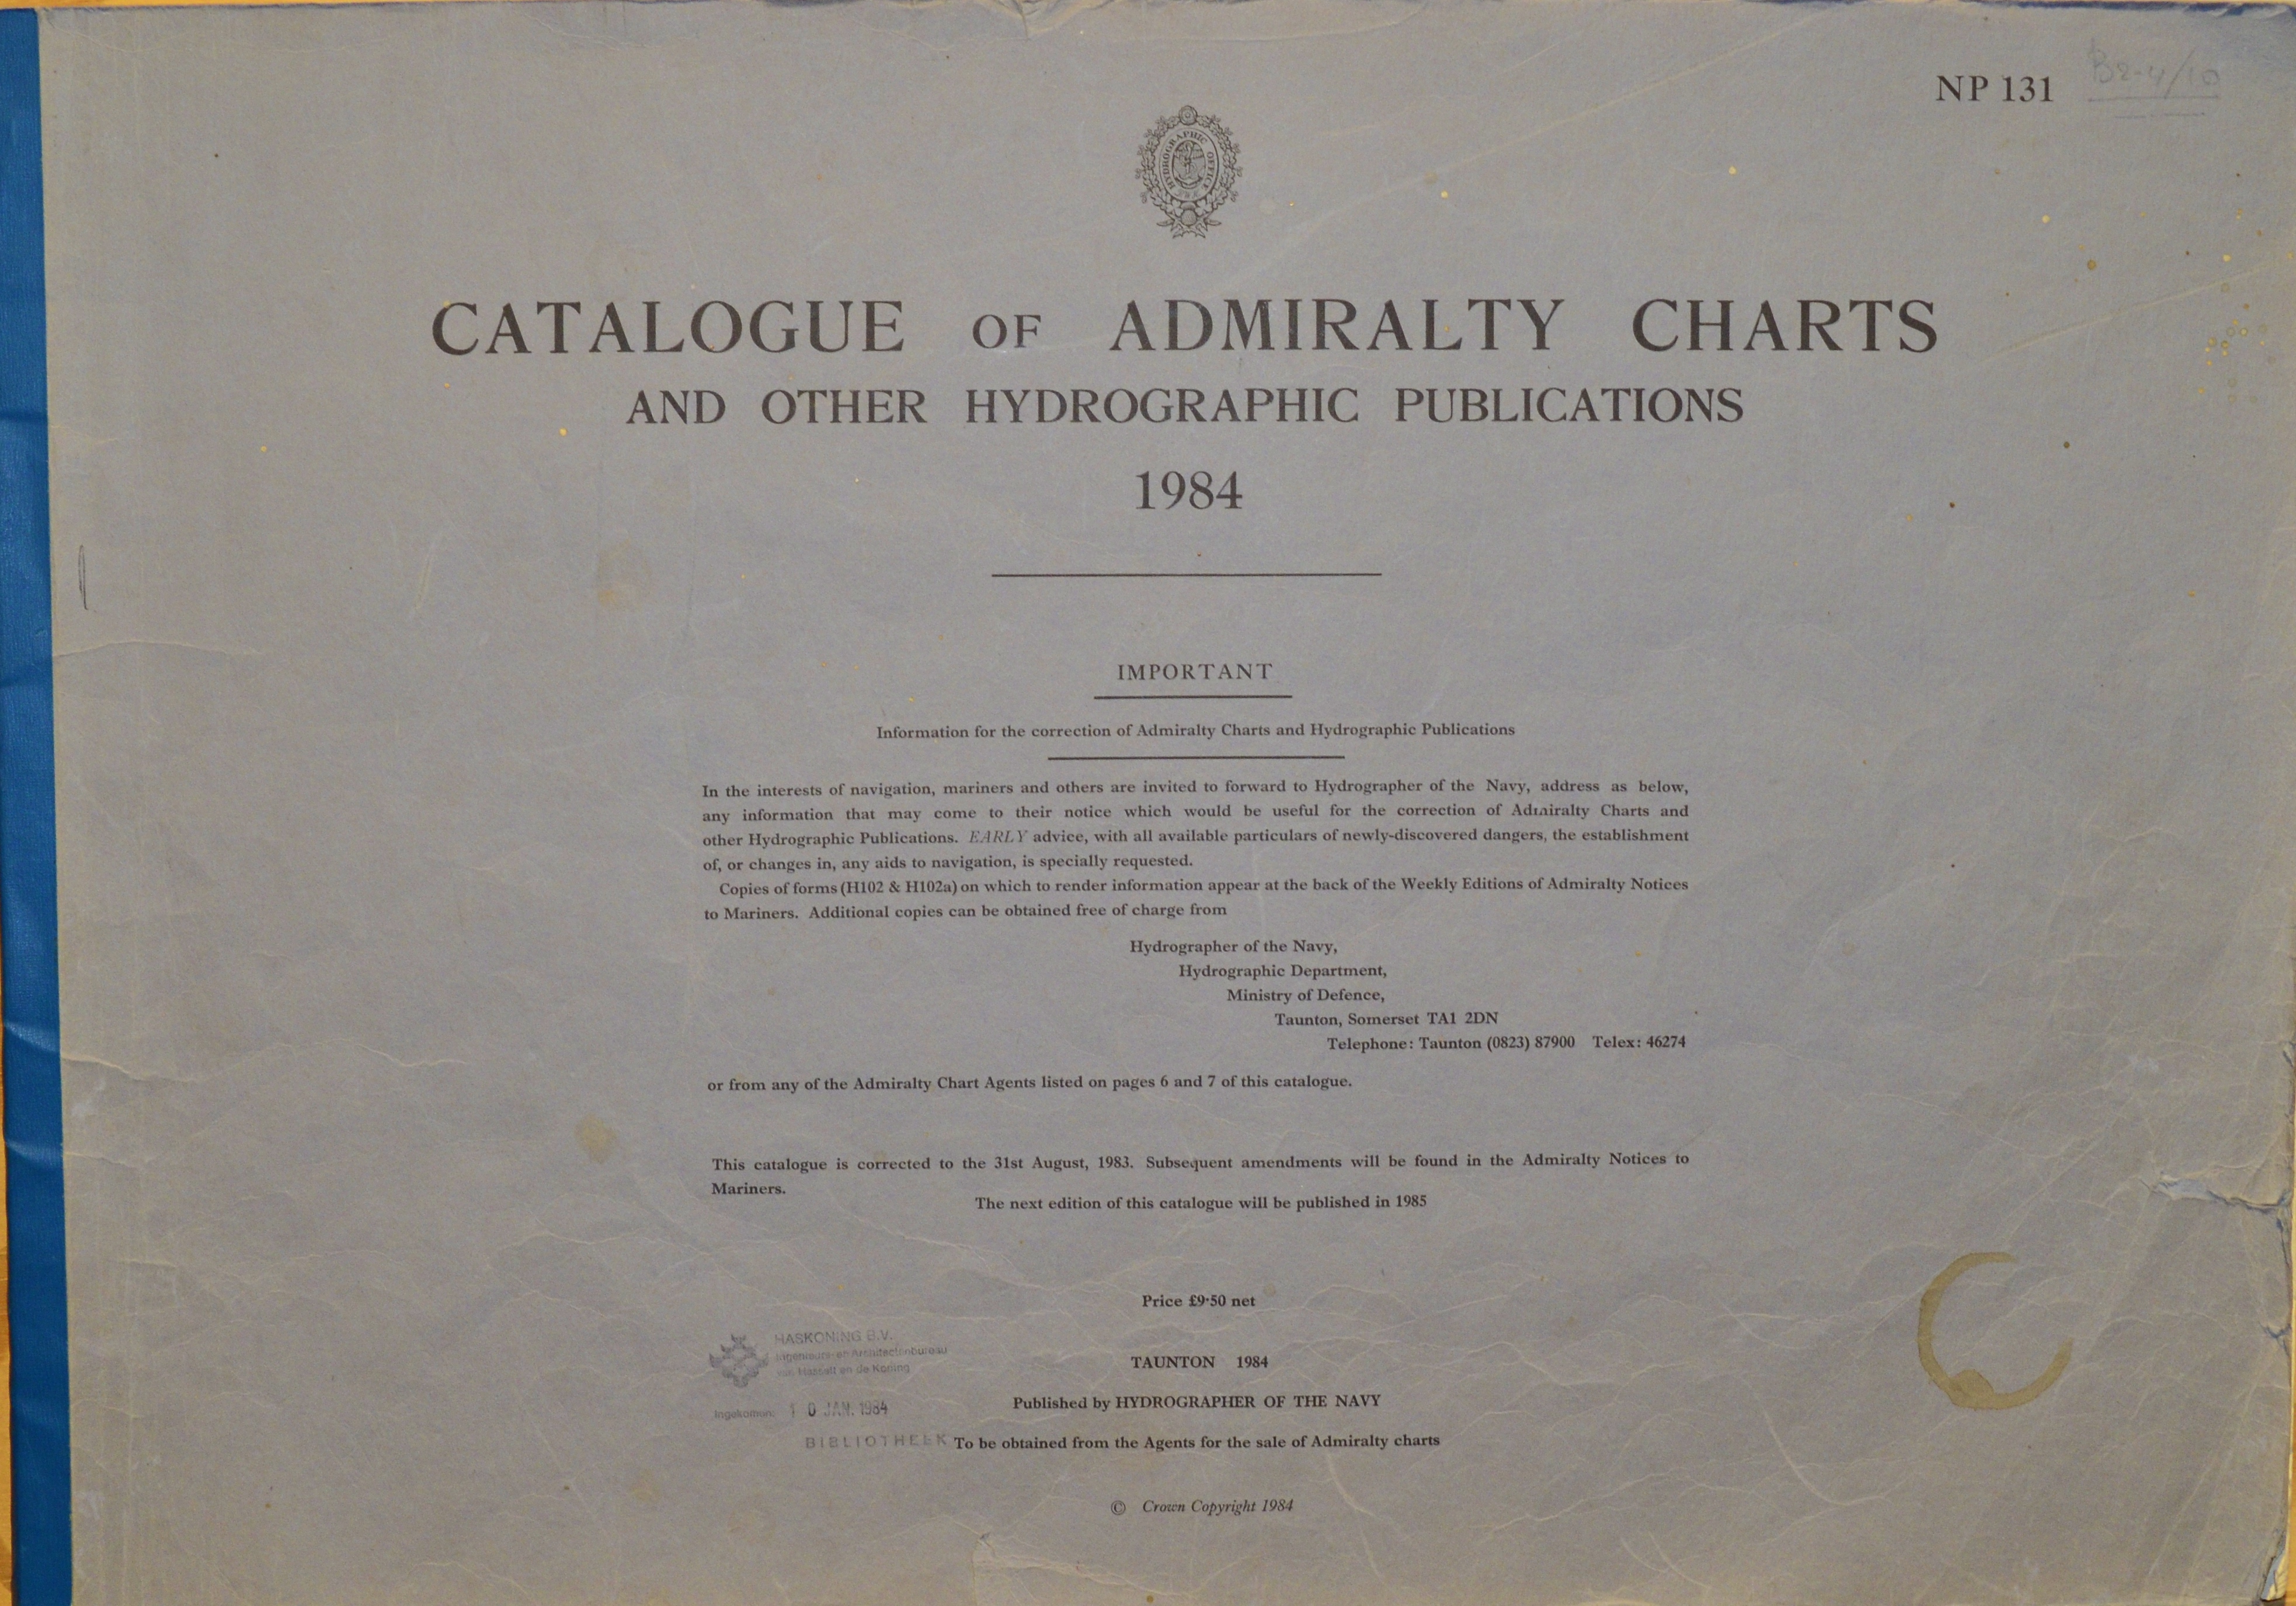 Admiralty Chart Agents